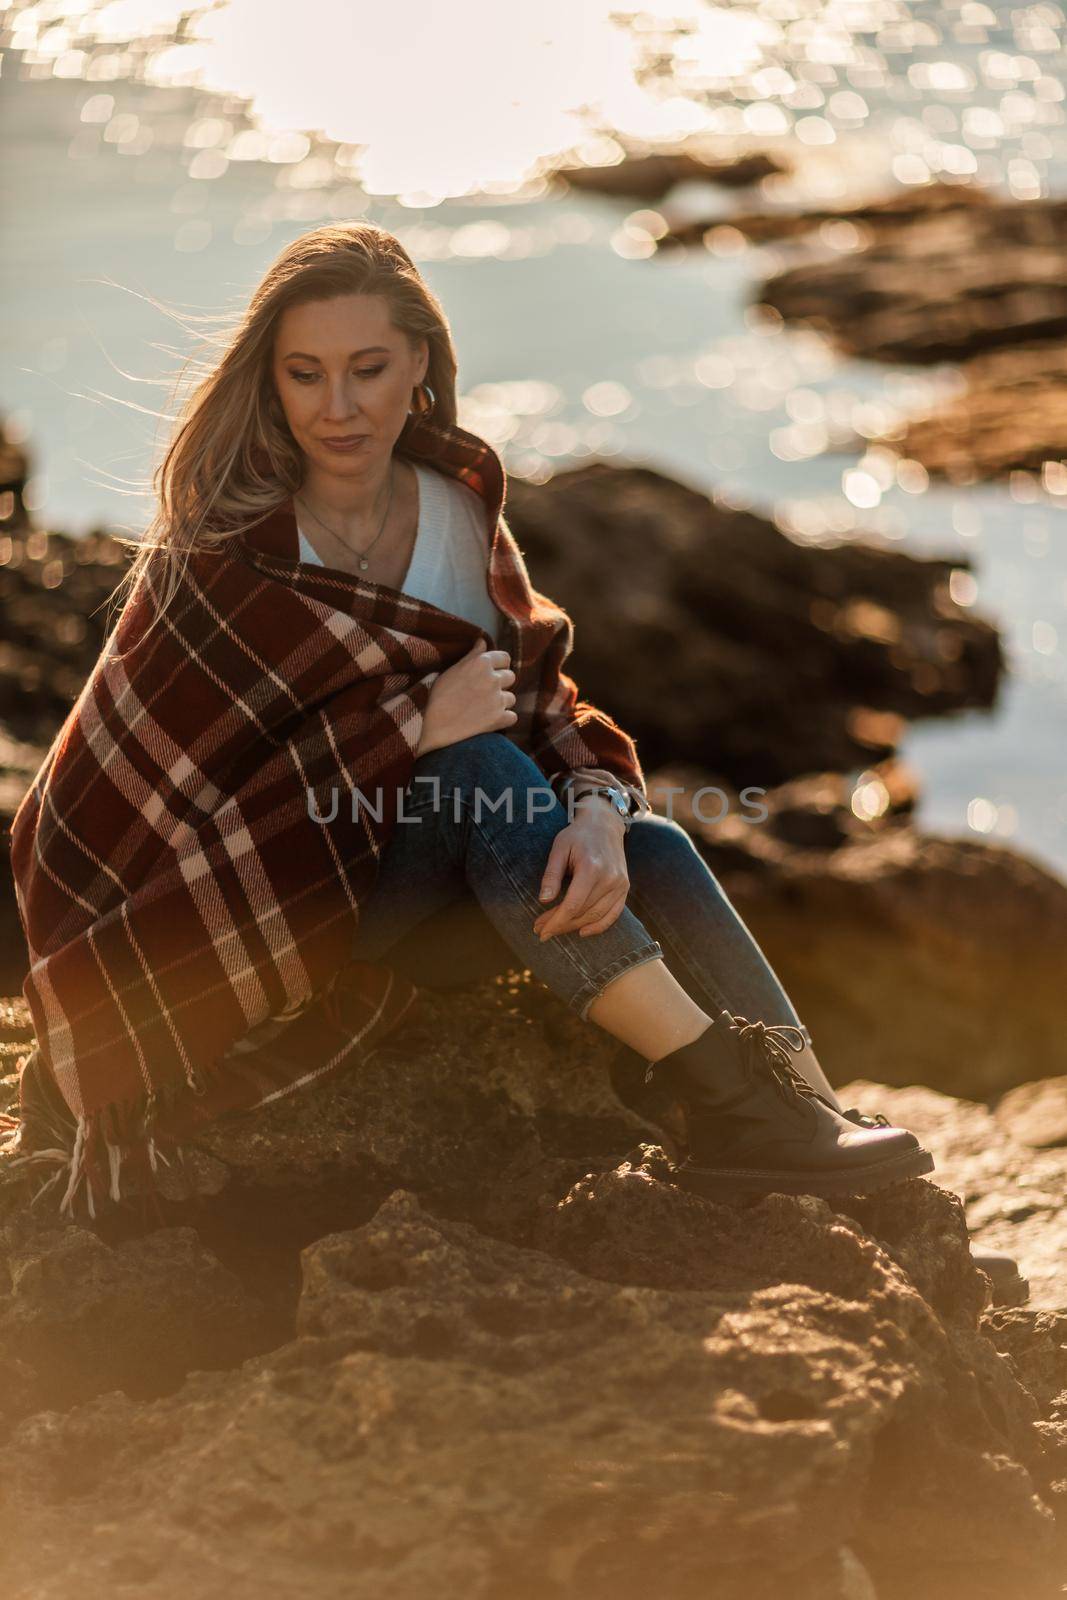 Attractive blonde Caucasian woman enjoying time on the beach at sunset, sitting in a blanket and looking to the side, with the sunset sky and sea in the background. Beach vacation. by Matiunina